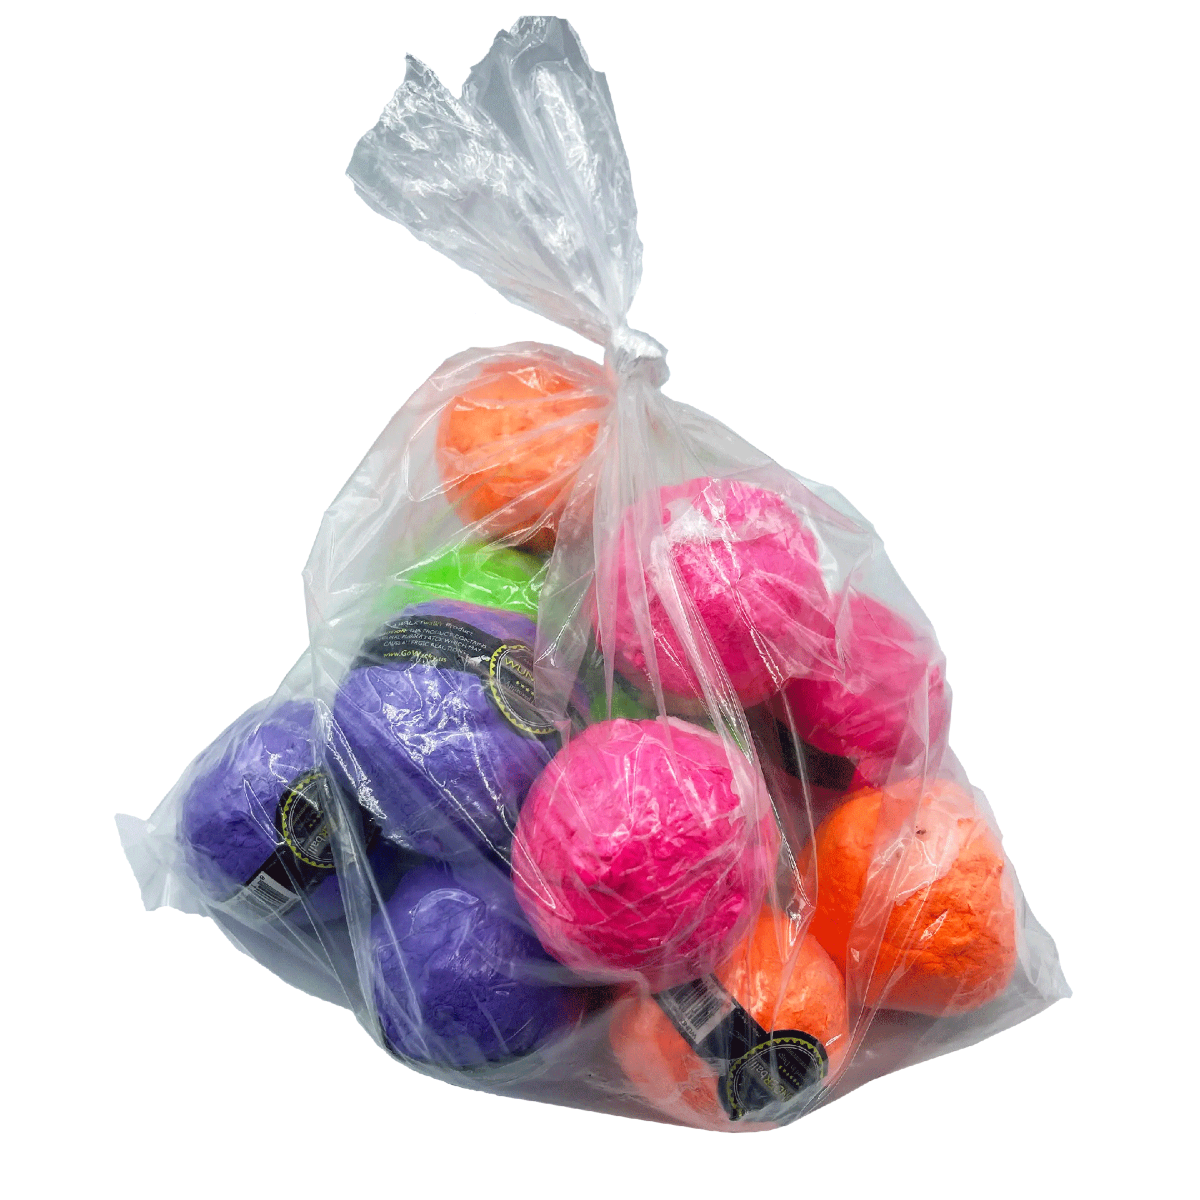 Wacky Walk'r Wunderball Indestructible Fetch Dog Toy, 12 Count - 4 Sizes Available